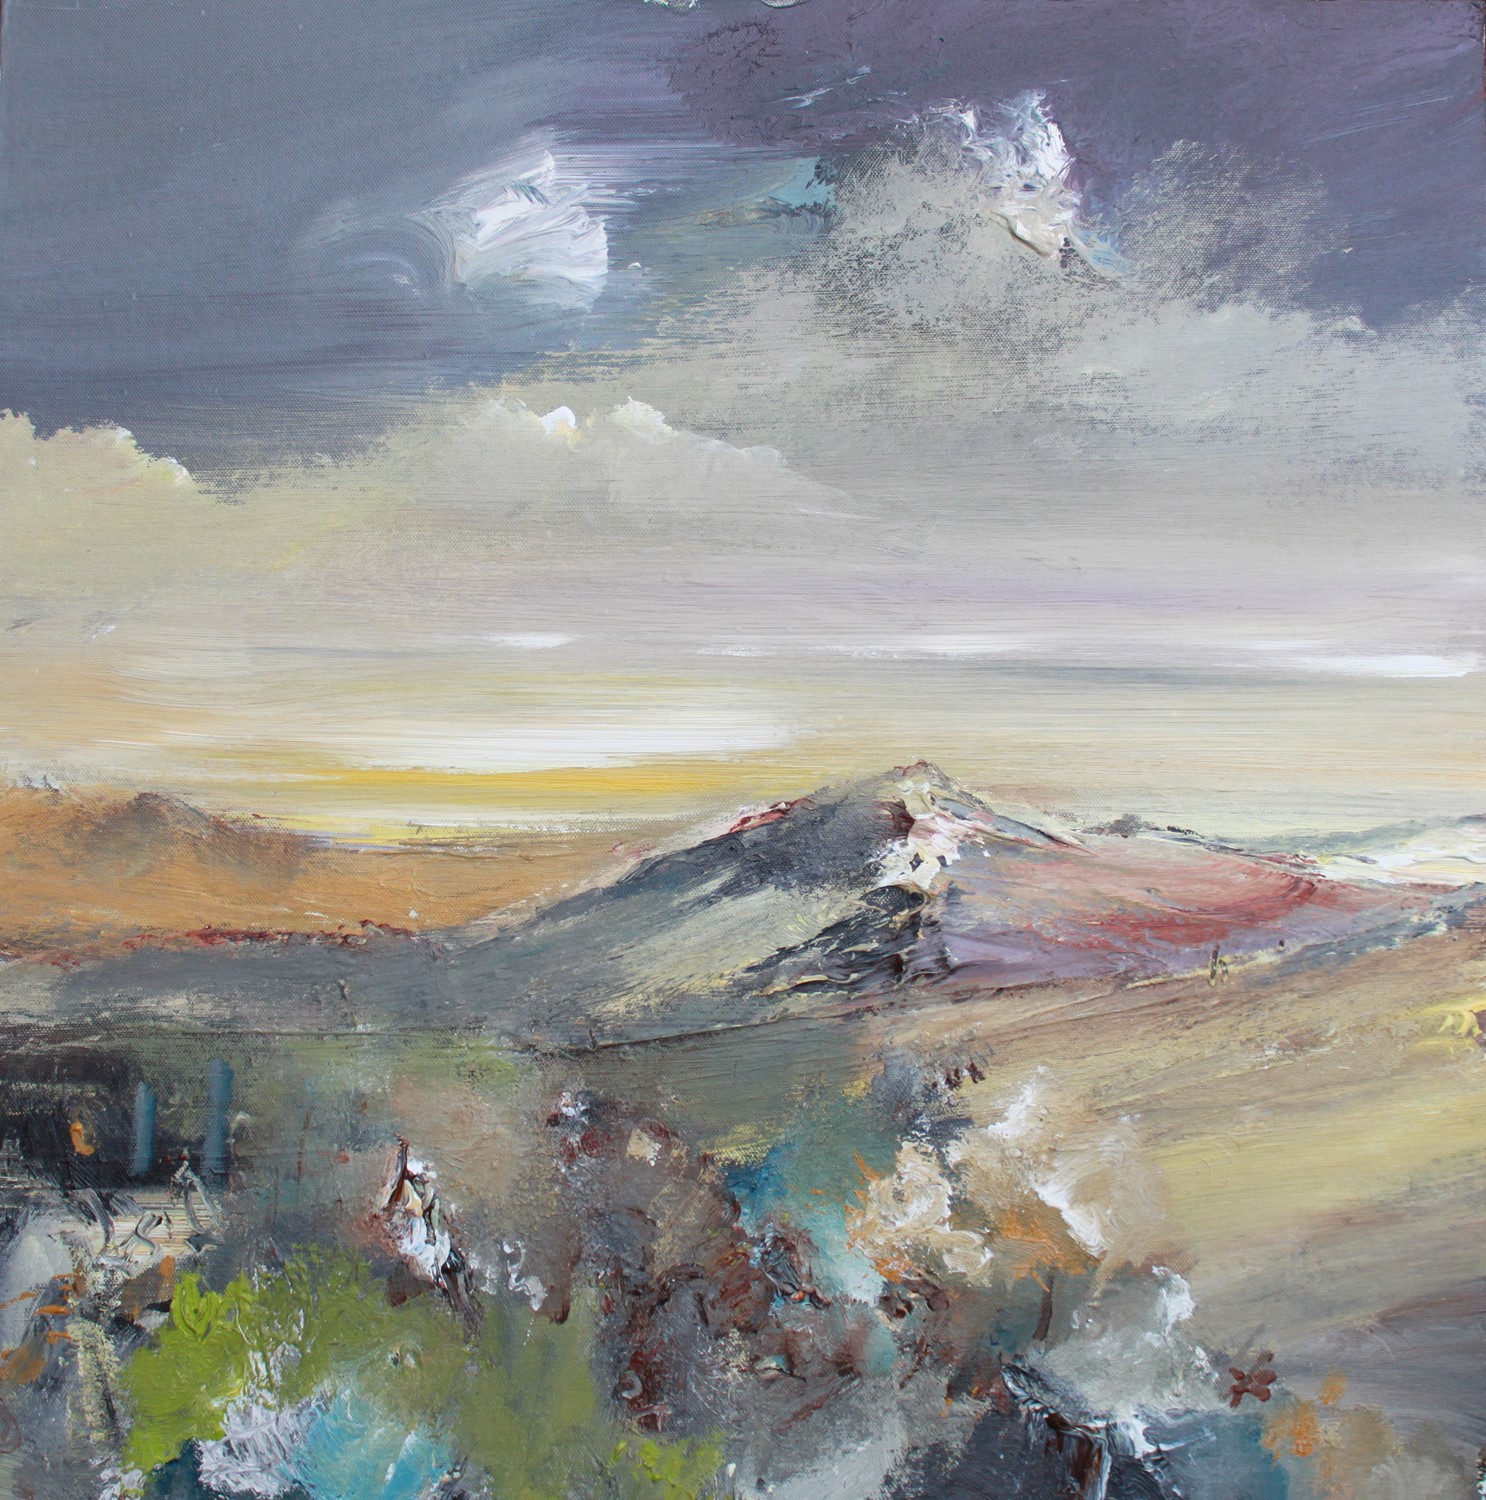 'A Walk in the Hills' by artist Rosanne Barr